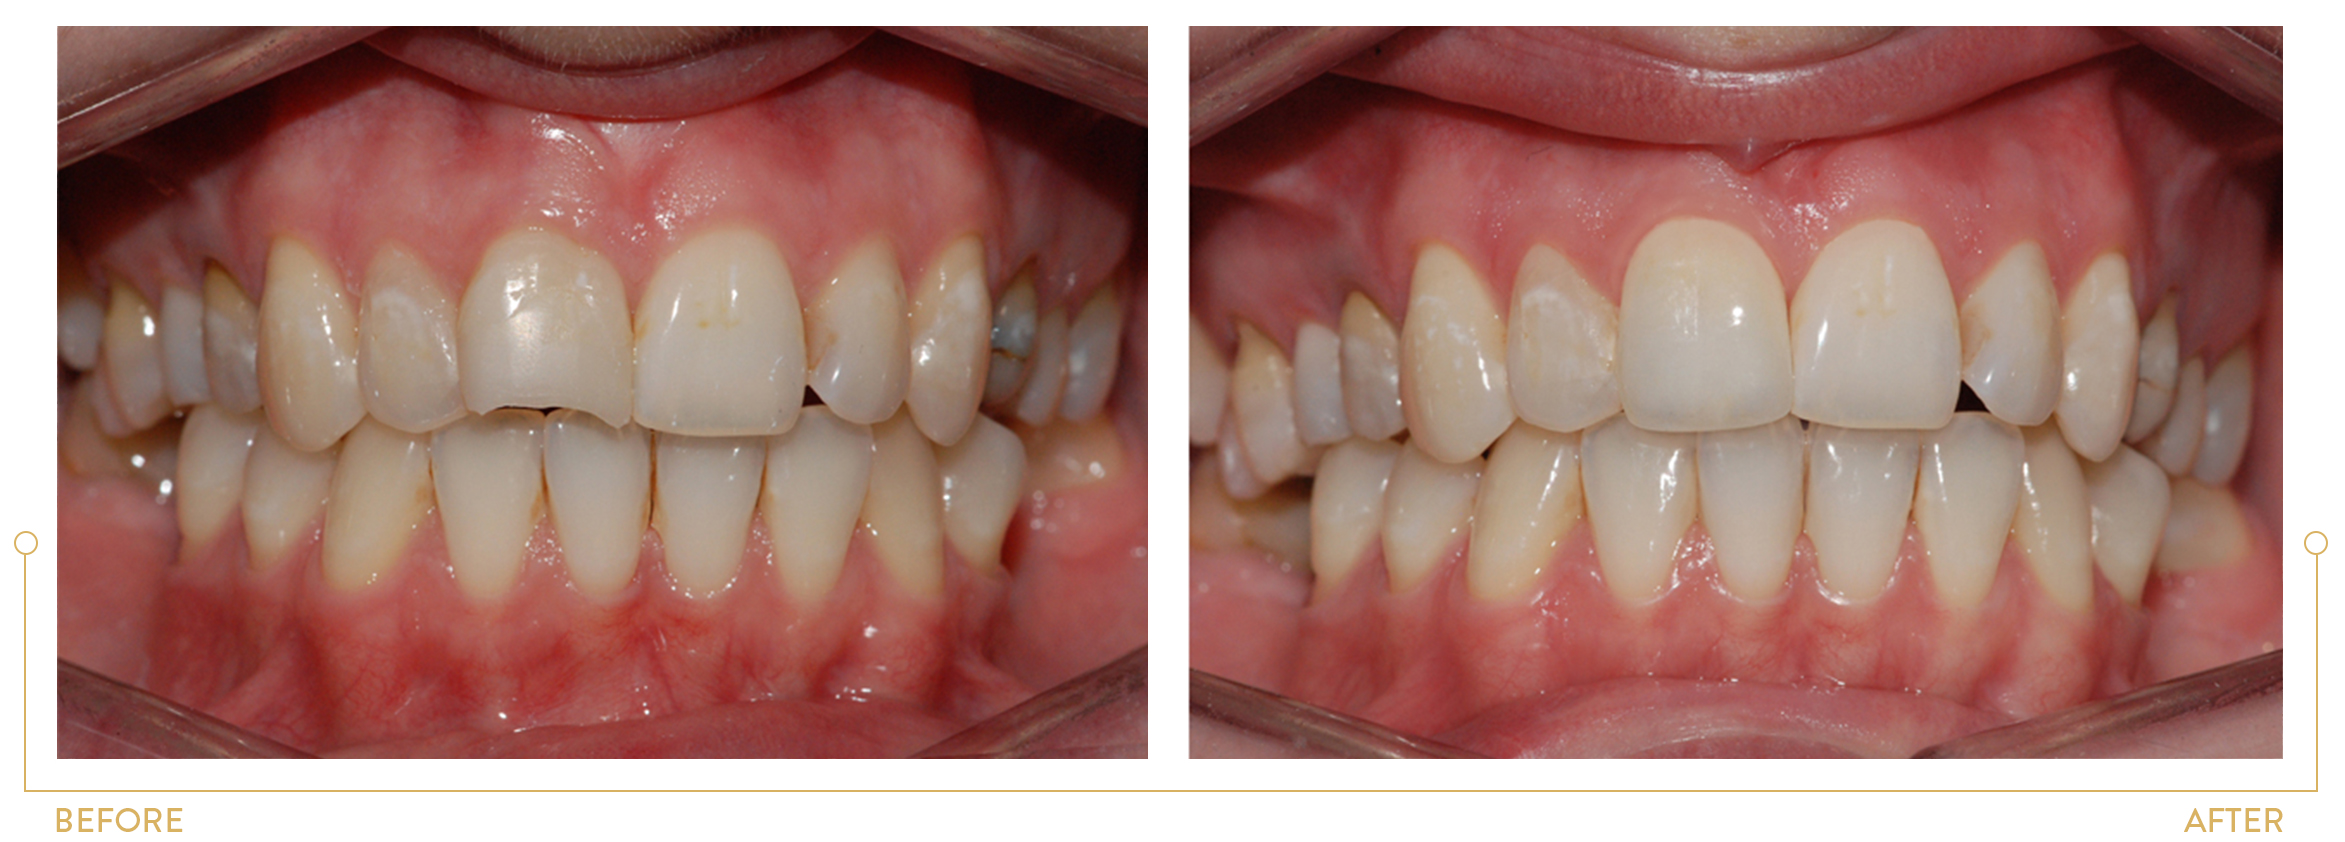 Smile makeovers, Transformations in cosmetic dentistry